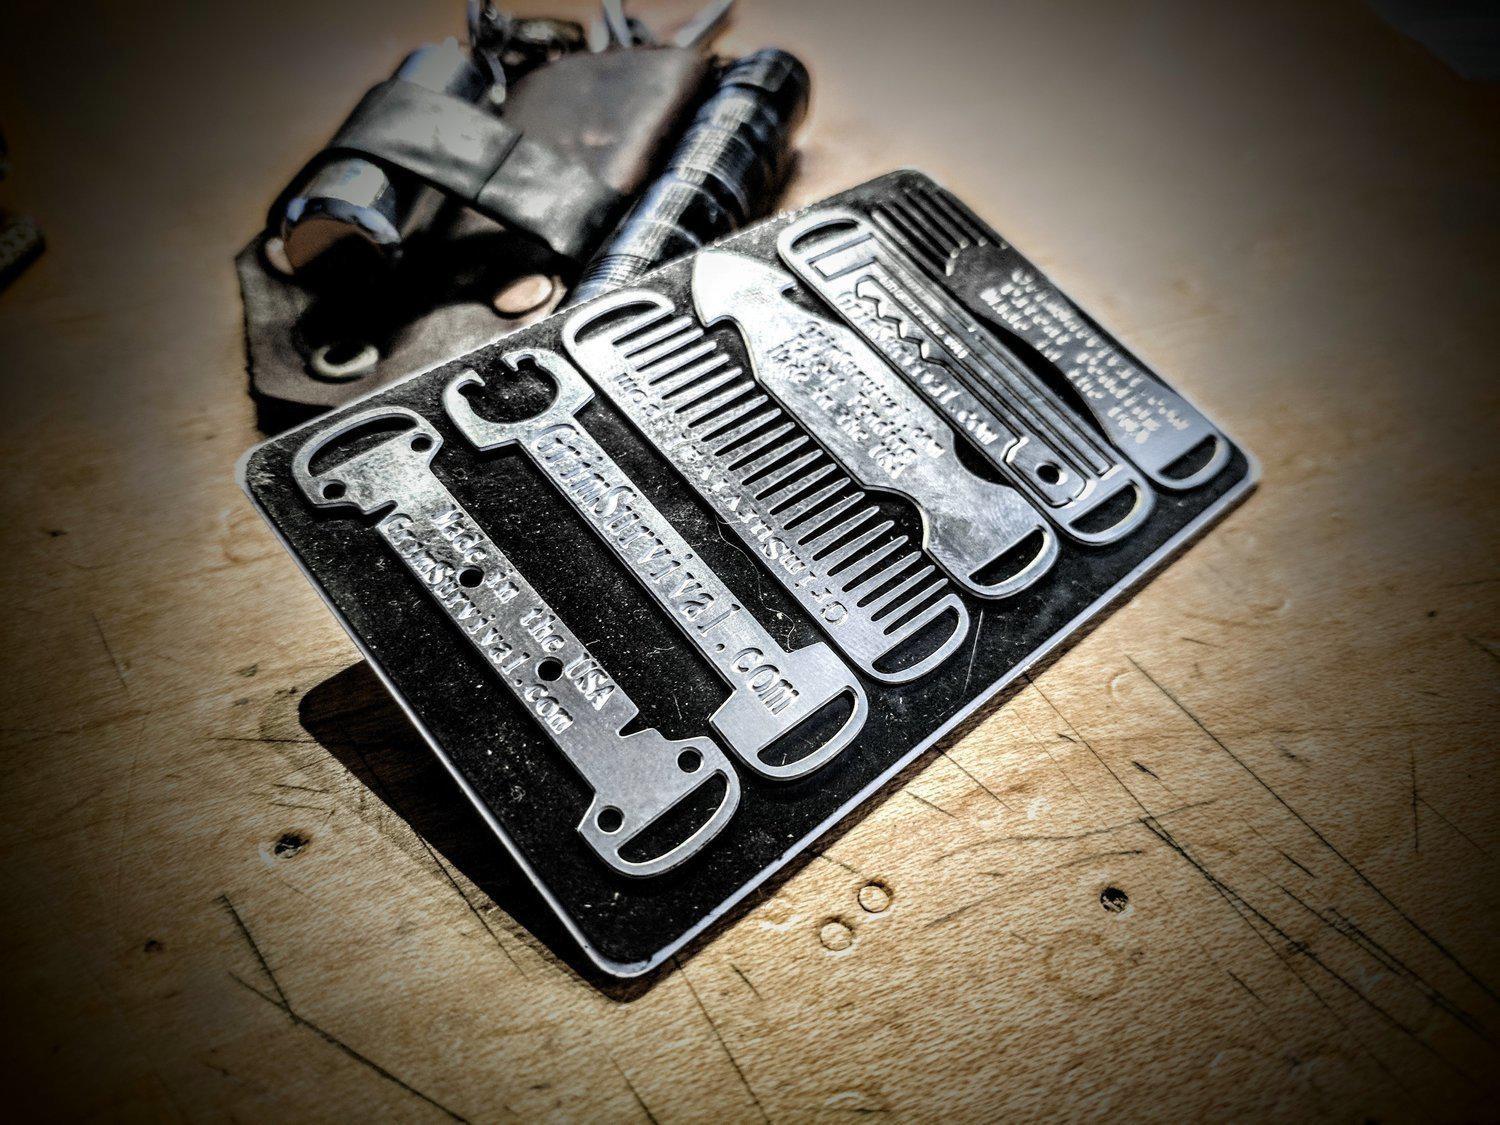 Credit Card Sized Micro Tool Holder (Tools not included)-Grimworkshop-bugoutbag-bushcraft-edc-gear-edctool-everydaycarry-survivalcard-survivalkit-wilderness-prepping-toolkit